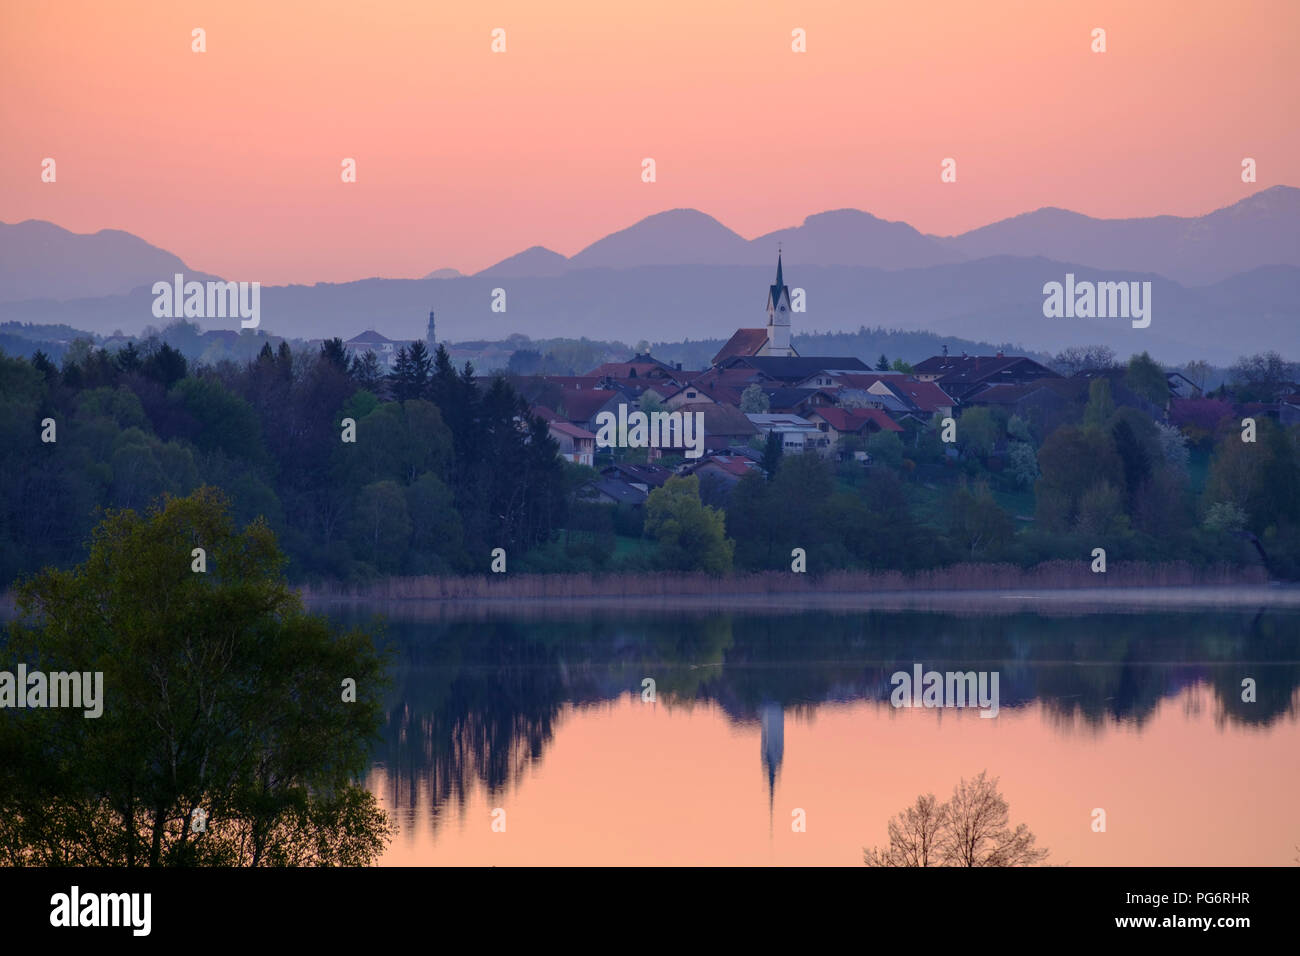 Germany, Bavaria, Upper Bavaria, Chiemgau, Tettenhausen at Tachinger See, Chiemgau and Berchtesgaden Alps in the background, red sky in the morning Stock Photo